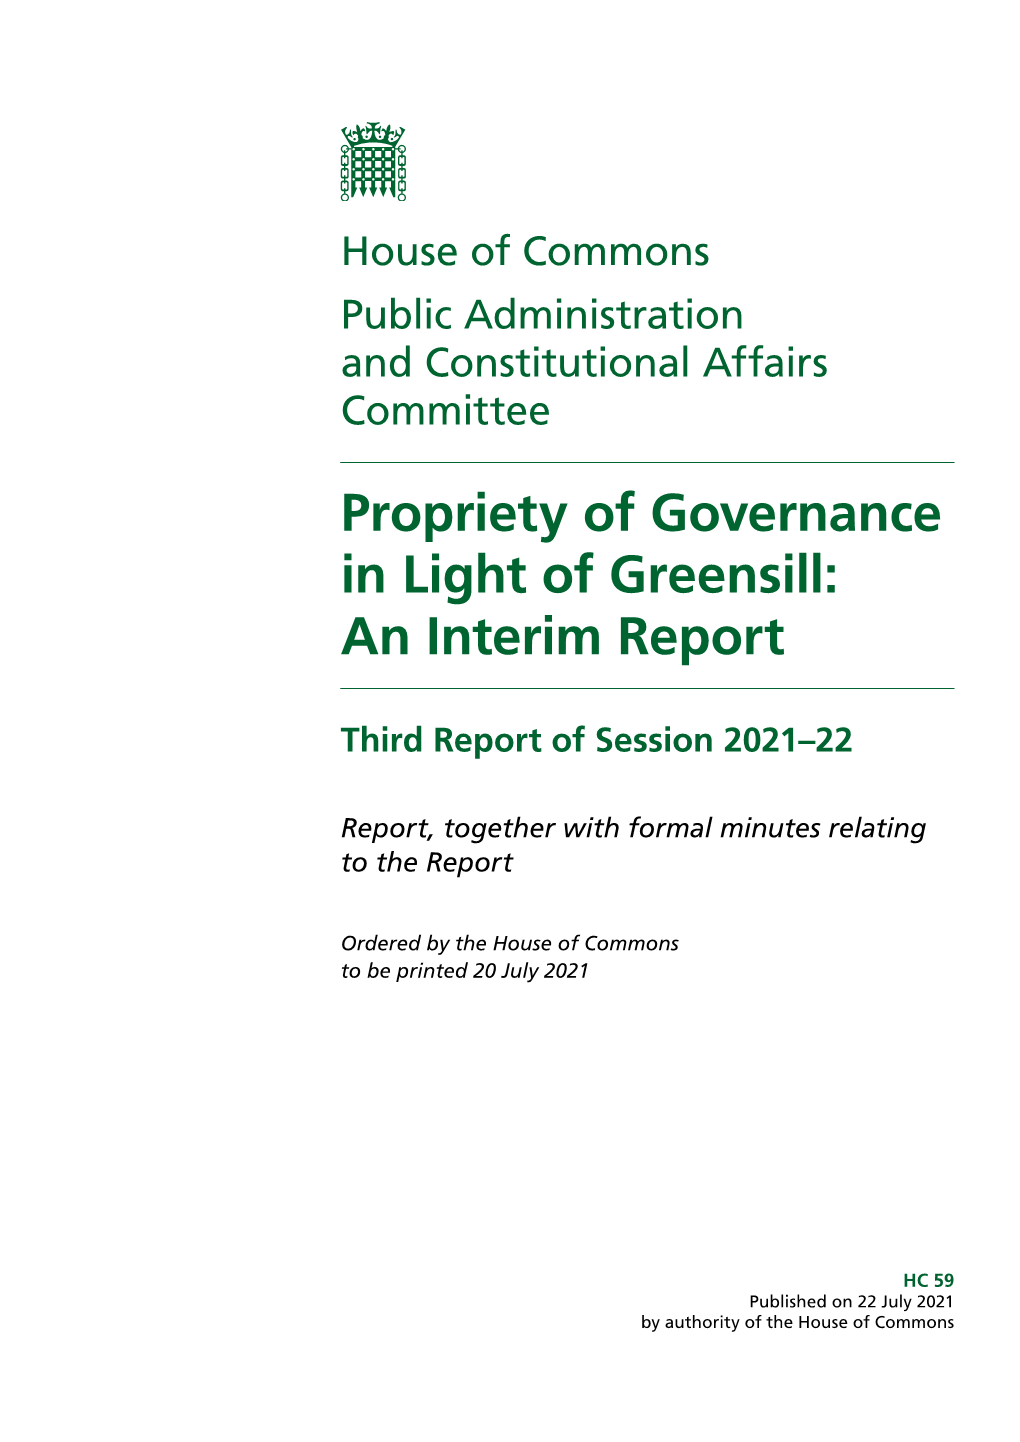 Propriety of Governance in Light of Greensill: an Interim Report